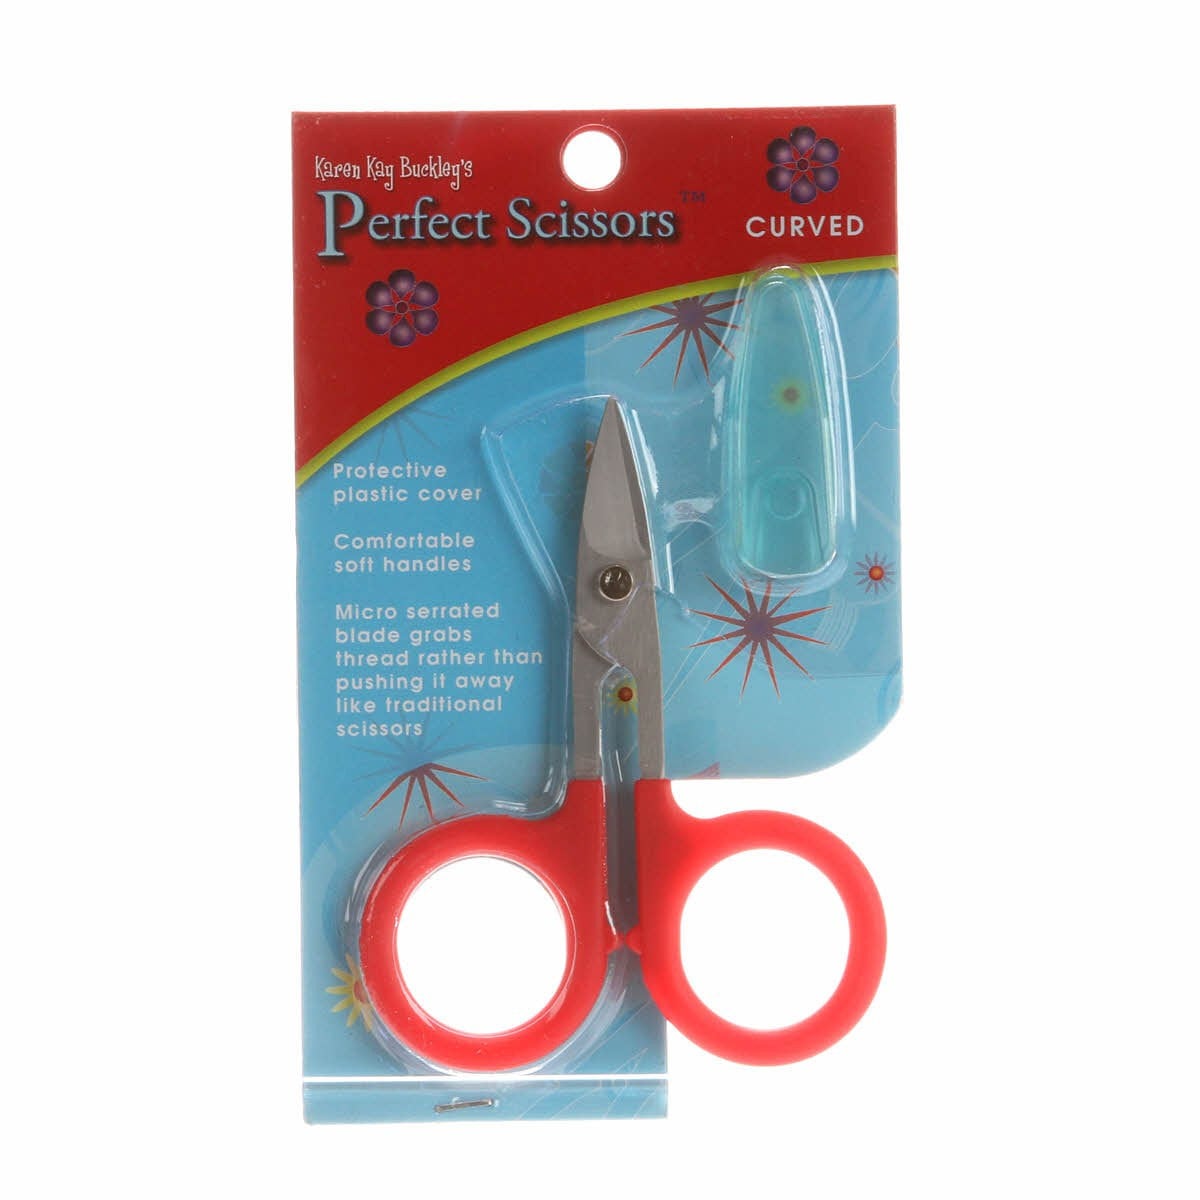 Karen Kay Buckley's 3 and 3/4 Inch Curved Perfect Scissors